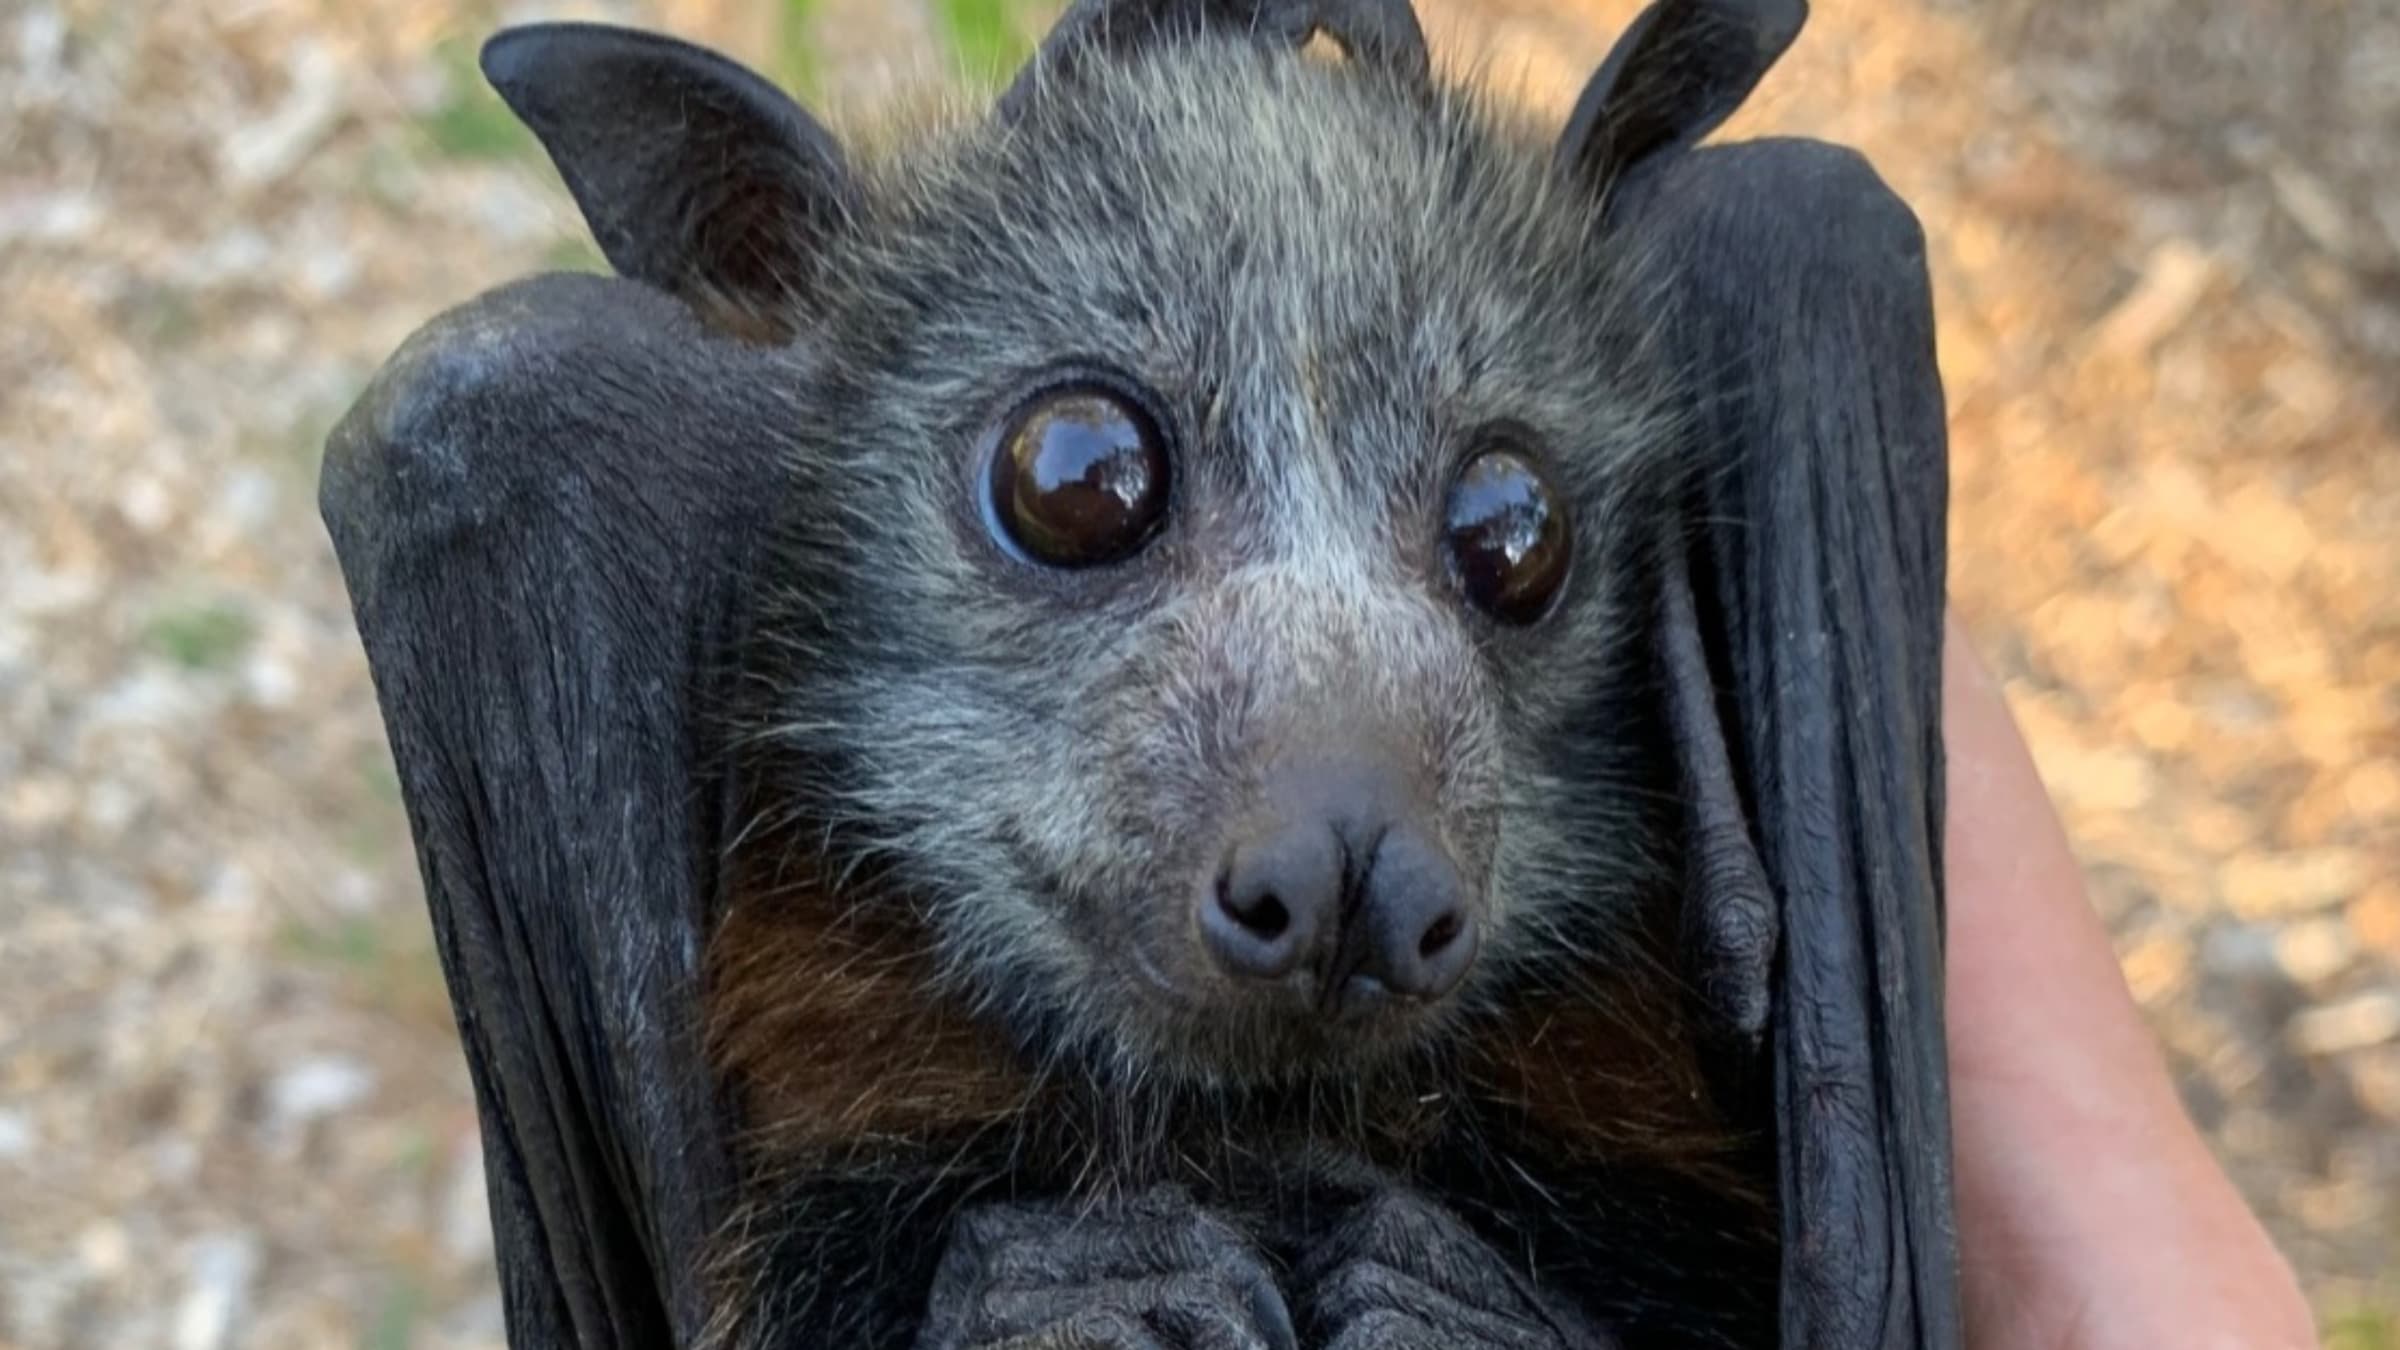 Australian Bushfires And Heat Are Killing Flying Foxes By The Thousands